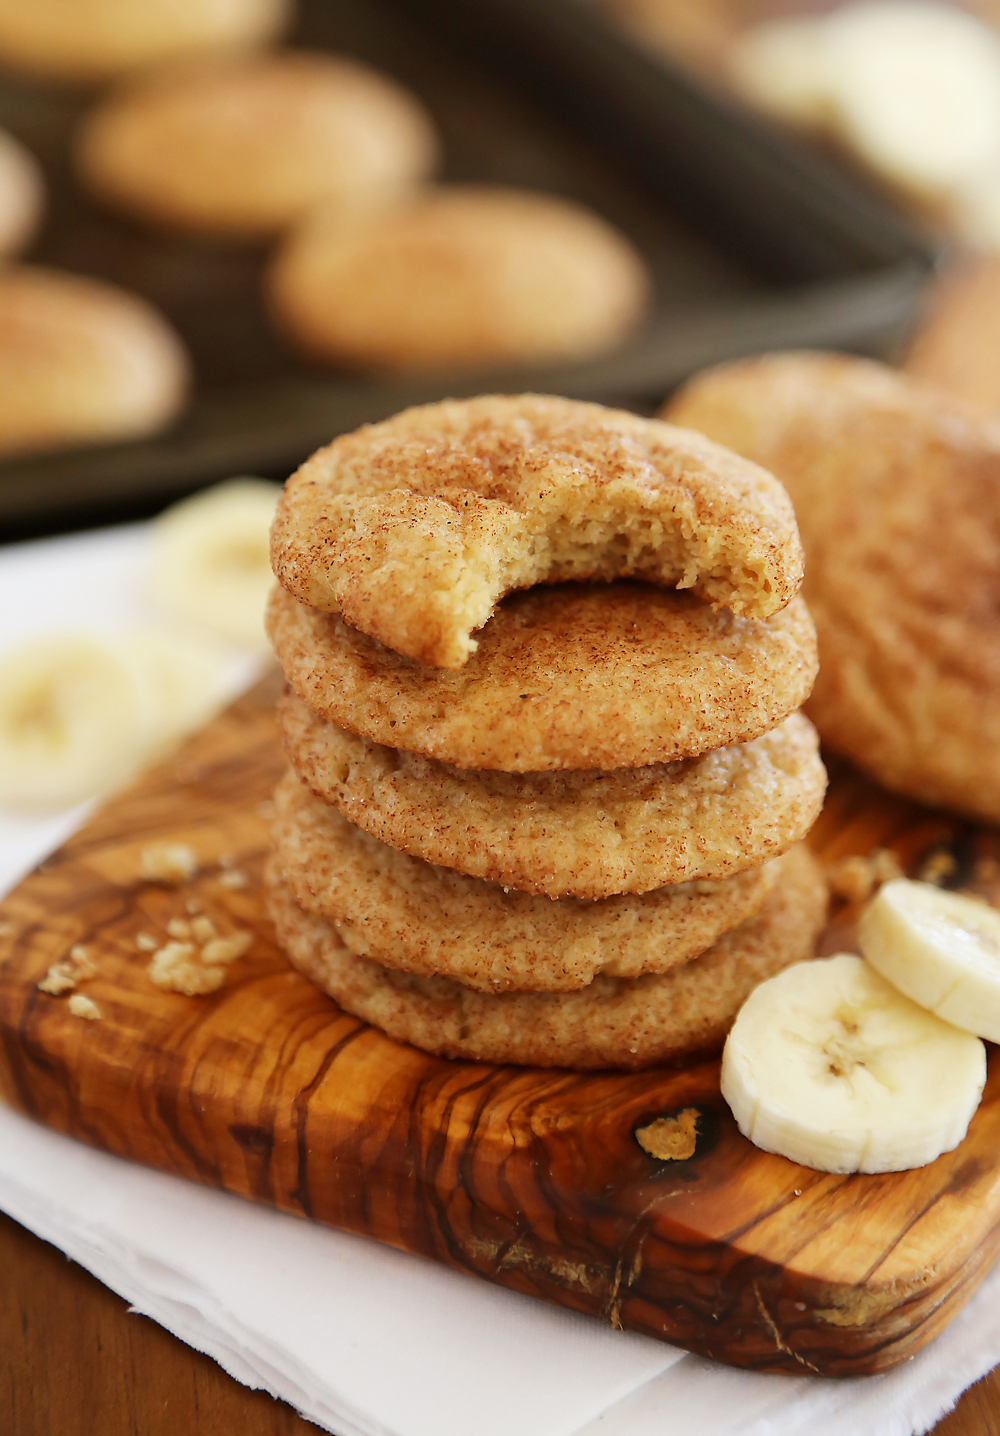 Banana Snickerdoodles – Leftover bananas? Bake these super soft, chewy cinnamon spiced snickerdoodles with sweet banana flavor! thecomfortofcooking.com